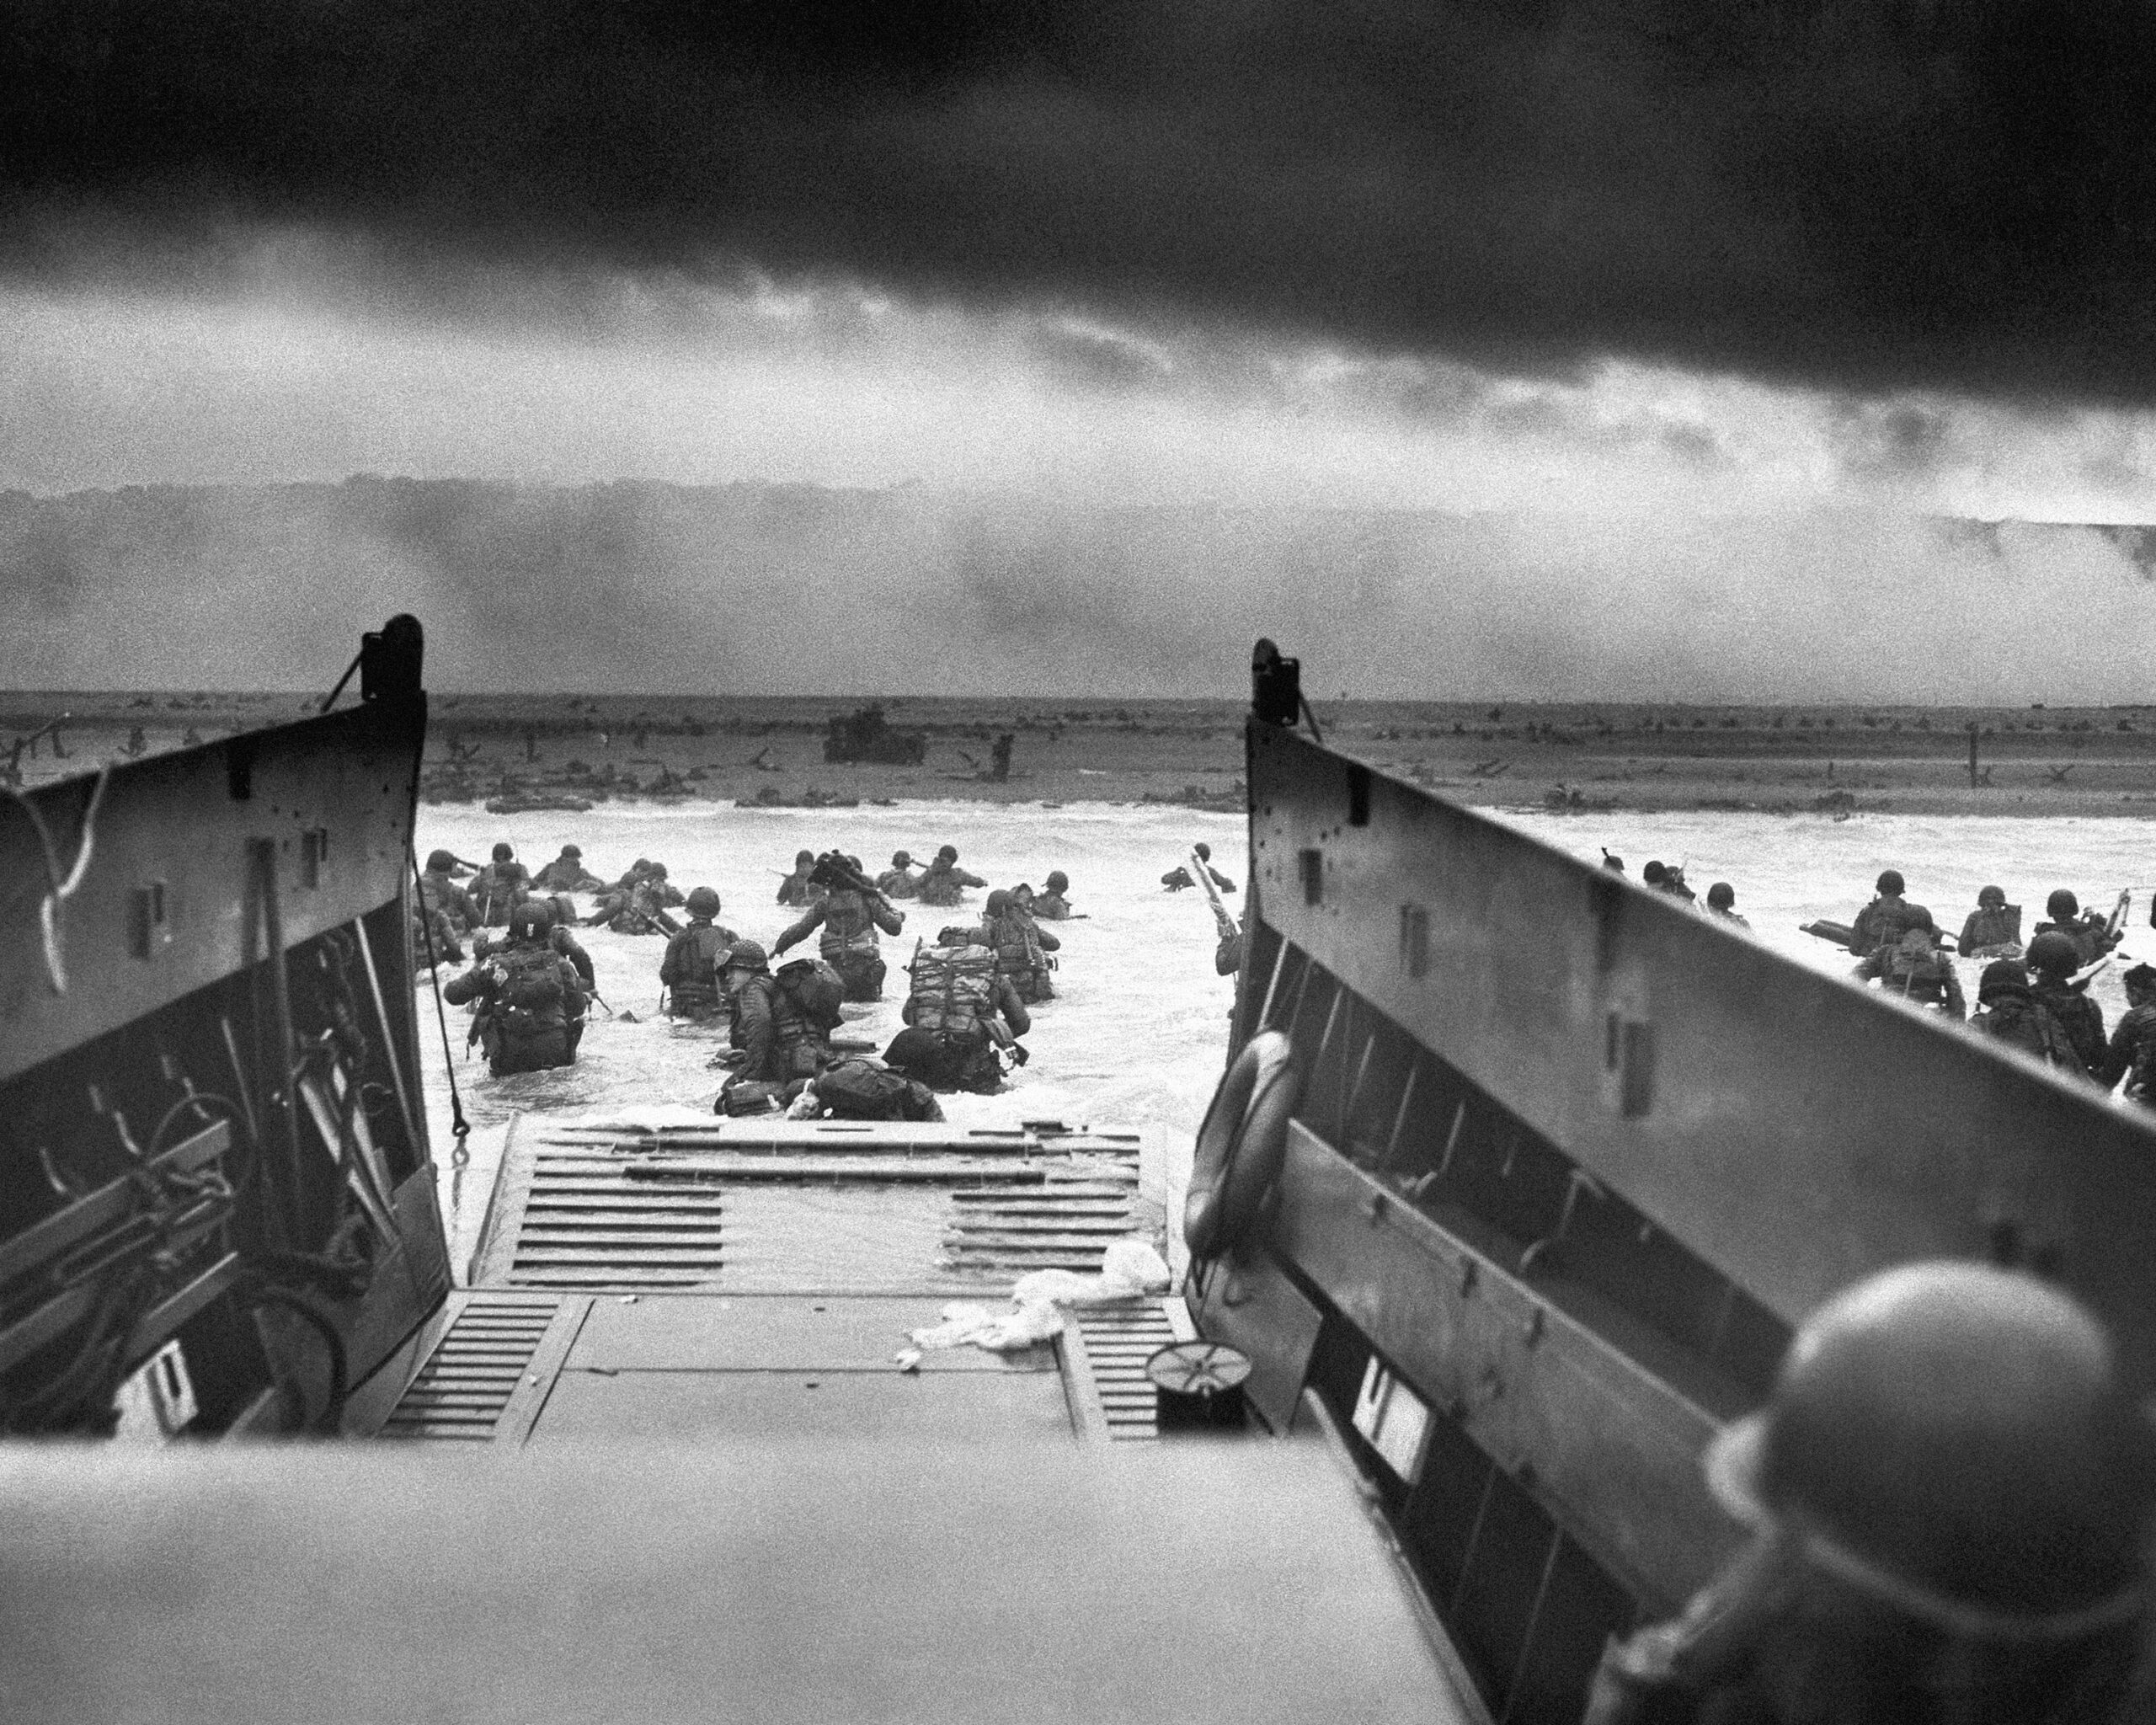 This photograph is believed to show E Company, 16th Regiment, 1st Infantry Division, participating in the first wave of assaults during D-Day in Normandy, France, June 6, 1944. The greatest armada ever assembled, nearly 7,000 ships and boats, supported by more than 11,000 planes, carried almost 133,000 troops across the Channel to establish toeholds on five heavily defended beaches stretched across 80 kilometers (50 miles) of Normandy coast. More than 9,000 Allied soldiers were killed or wounded in the first 24 hours. (Chief Photographer's Mate Robert M. Sargent, U.S. Coast Guard via AP, File)